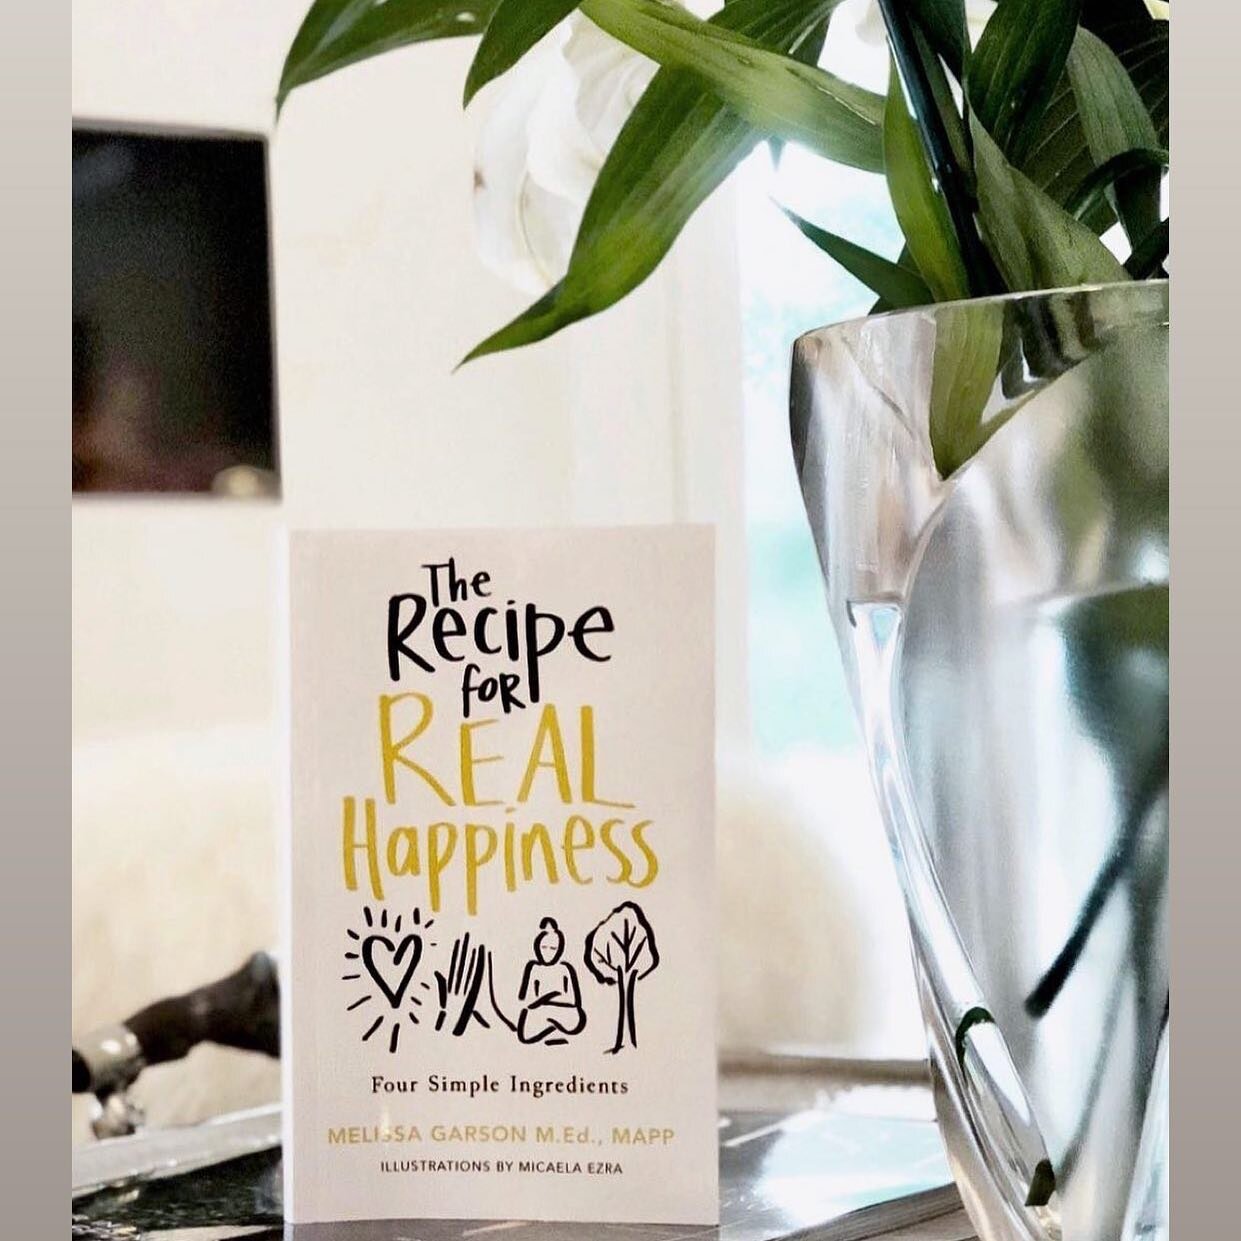 You can purchase my book on Amazon! Please click on the link or copy the link and paste it in a new web browser: https://www.amazon.com/Recipe-Real-Happiness-Ingredients-Practices/dp/0692048944/ref=mp_s_a_1_3?dchild=1&amp;keywords=the+ingredients+for